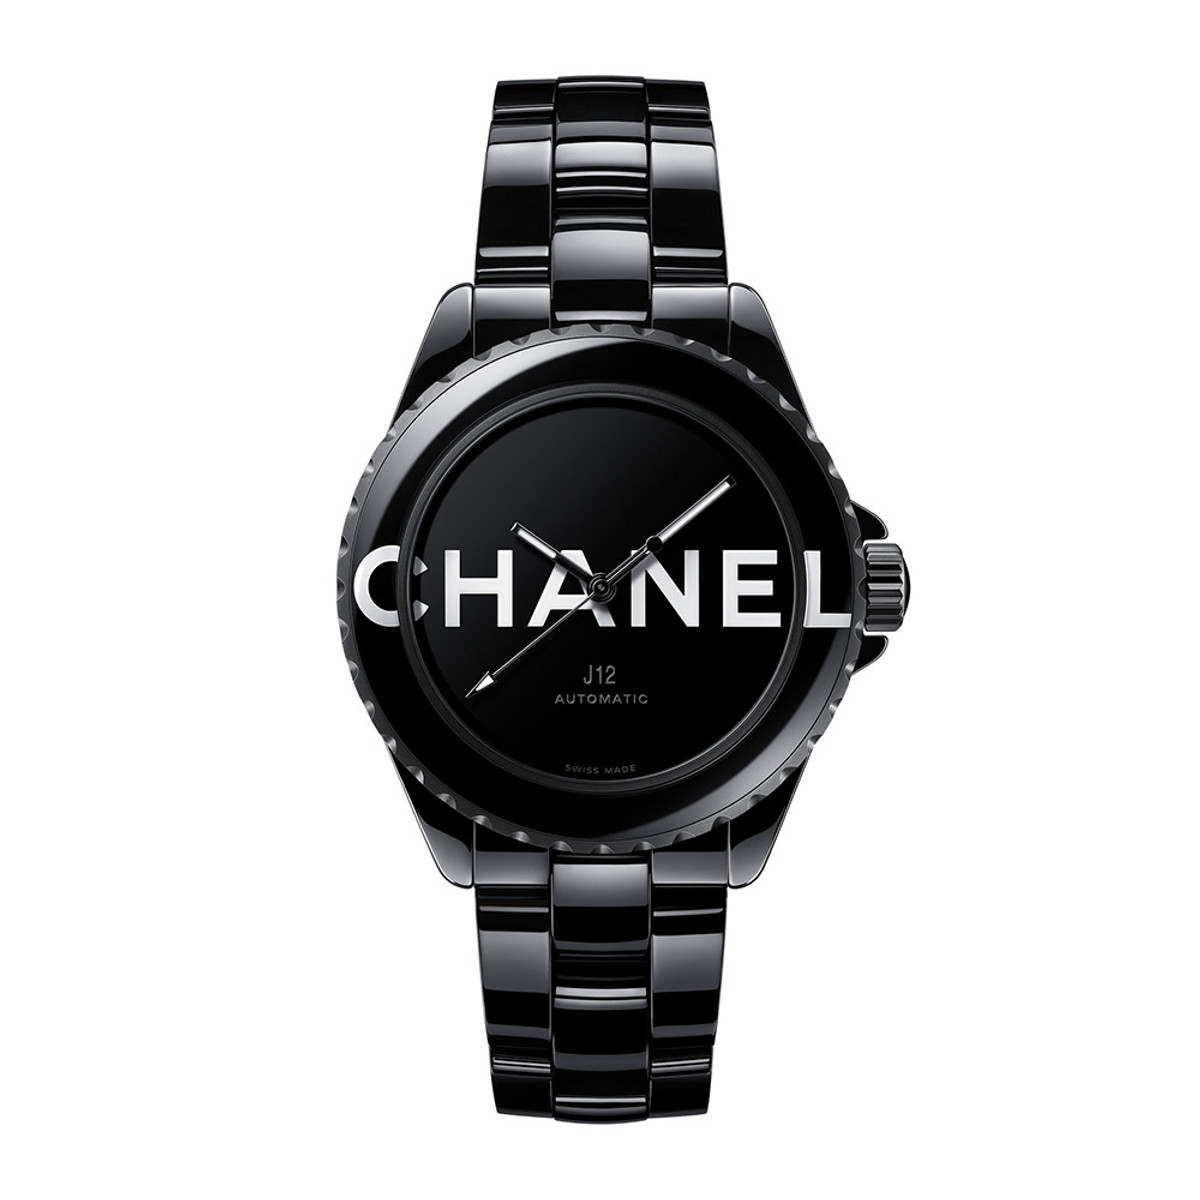 CHANEL J12 WANTED DE CHANEL WATCH, 38 MM-42725 Product Image